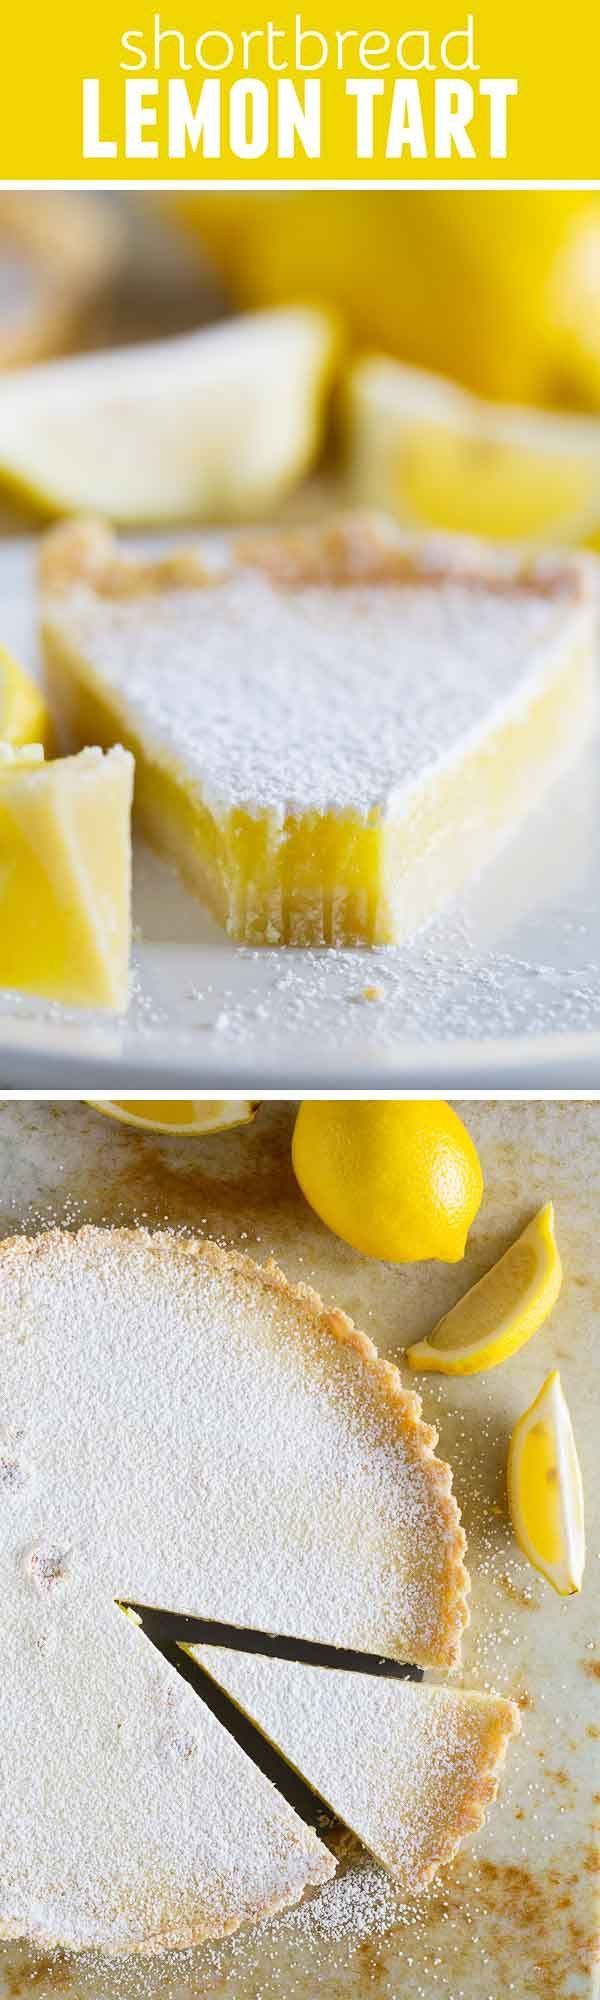 Perfectly sweet and perfectly tart, this Shortbread Lemon Tart Recipe tastes like the best lemon bars in pie form.